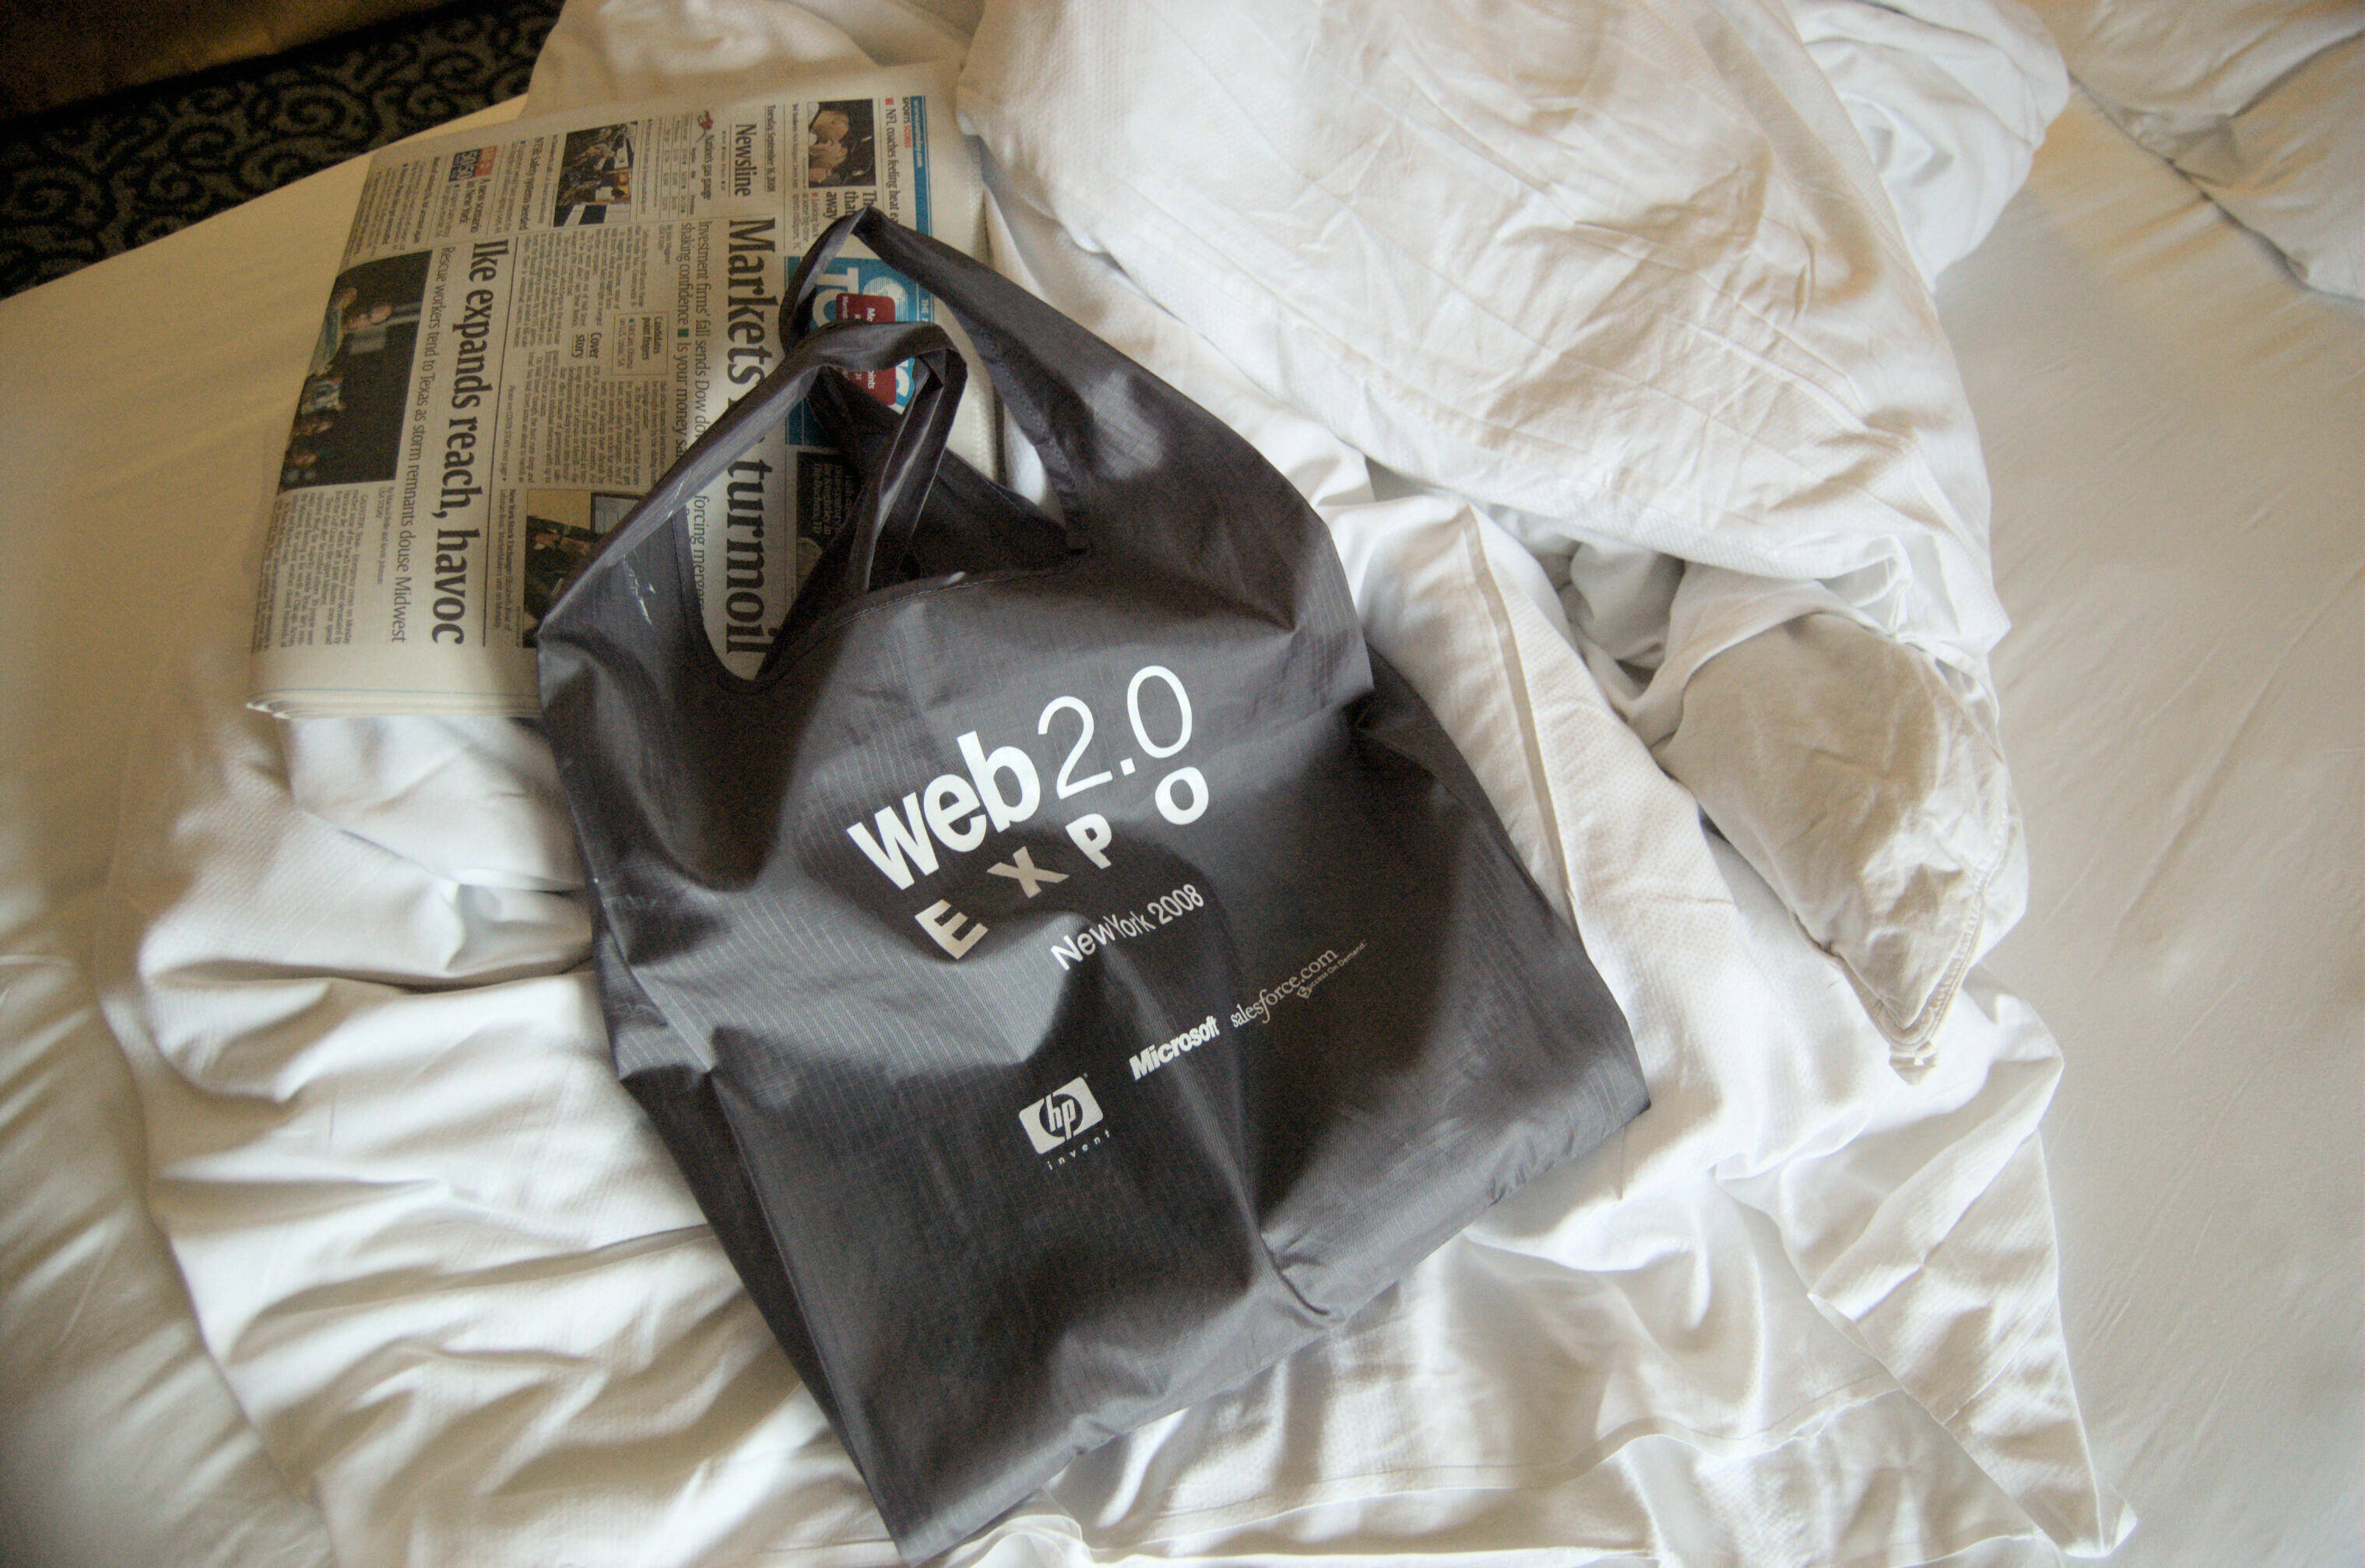 web 2.0 swag bag kevin brought back to hotel after conference